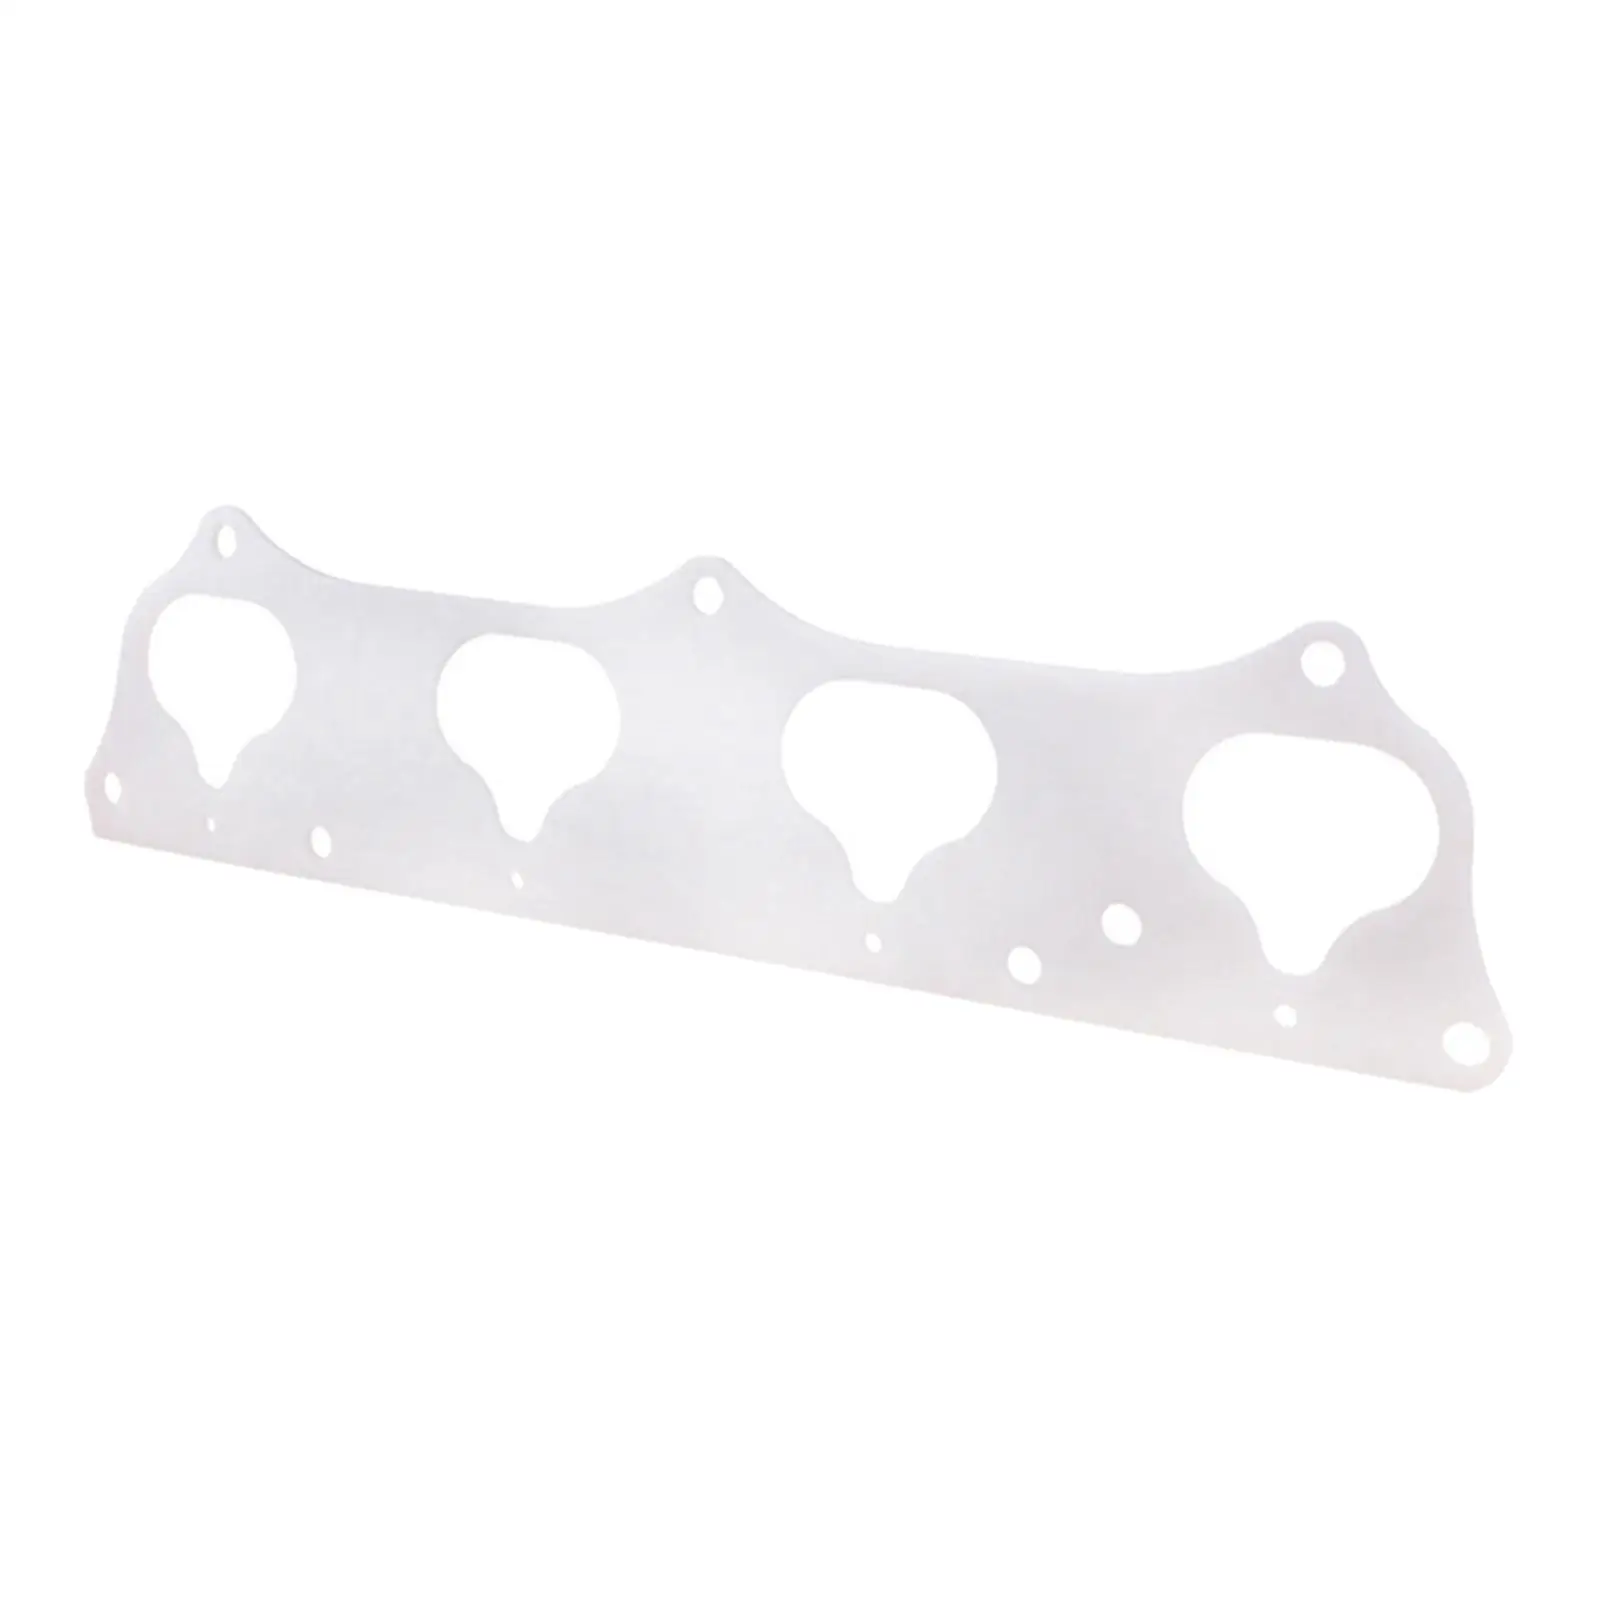 Thermal Intake Manifold Gasket Premium High Performance Durable Replacement Accessories for Swap K20A/A2/A3/Z1 K-series